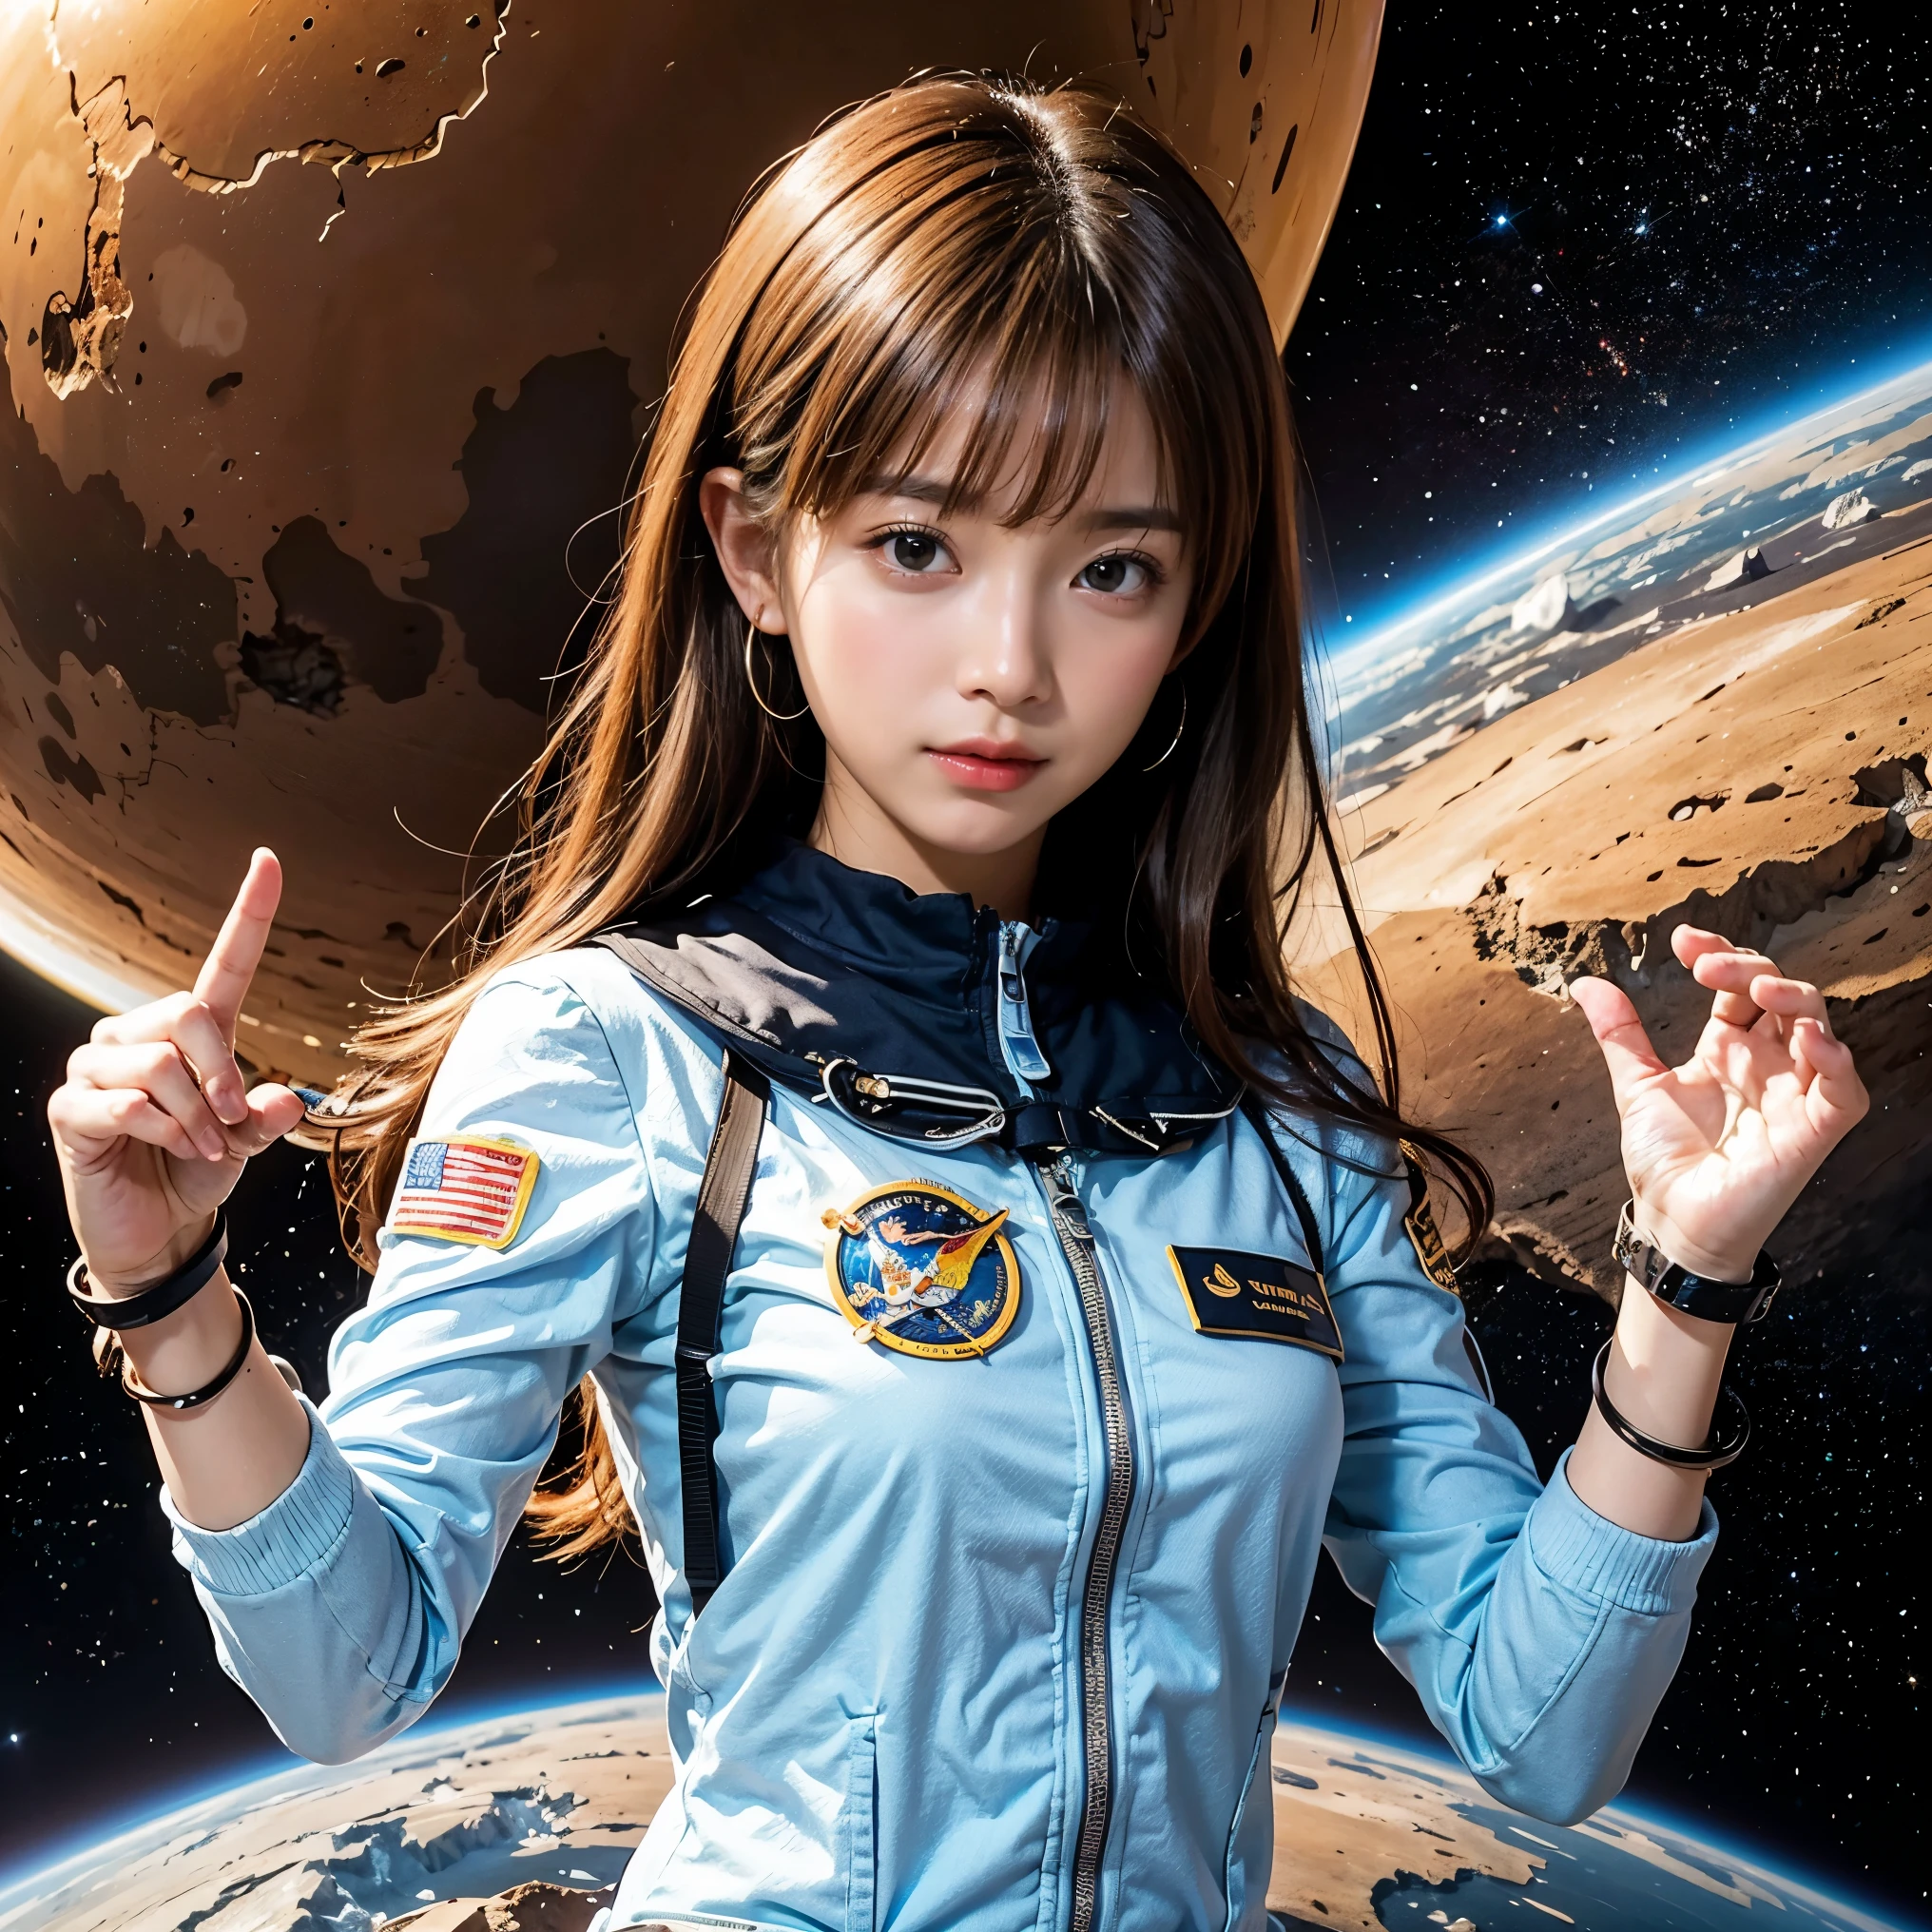 (Tabletop, highest quality:1.2), 8k, Official Art, Surprised expression、Put your hand over your mouth、Wearing a suitいる、Gesture of removing tie、I can see your chest、A rough image of a girl in a uniform holding a globe, Official Artワーク, Portrait Anime Astronaut Girl, with the earth, girl in space, Space High School, Space Girl, planet, Trending on cgstation, extrasolar planet, Official Art, Mars planet, Beautiful anime school girl, sakimichan, Floating next to the planet, galaxy japan、Five Fingers Photos&#39;Body of, Whole Body Ezbian、The beauty of a suit、Big Dipper in the background、star explosion、Beautiful black-haired barefoot woman, hold a flame in your right hand、Tie your tie with your right hand、Look up、Looking down、Cool look、Bright lava lights rise from beneath the asteroid belt over the broken Earth(Jagged rocks and debris flew into the air.:1.3) (Windy dust storm:1.1) Volume fogmist by trace Z、Allows bright light from below to pass through、 (masterpiece) (highest quality) (detailed) (8k) (Cinema lighting) (Sharp focus) (Complex)Black-haired、14 years、、fun、Laughter、unbelievably ridiculous, (Beautiful girl, Pretty face, lean back, Gold ornament in hair、Wearing a suit、close, Wearing a suitいる, Short sleeve, Gardenia, Violet, space , View your viewers, Film Grain, chromatic aberration,  sharp focus, Face Light, Dynamic Lighting, Cinema Lighting, Detailed eyes and face, (Grey tie、1:1.2)